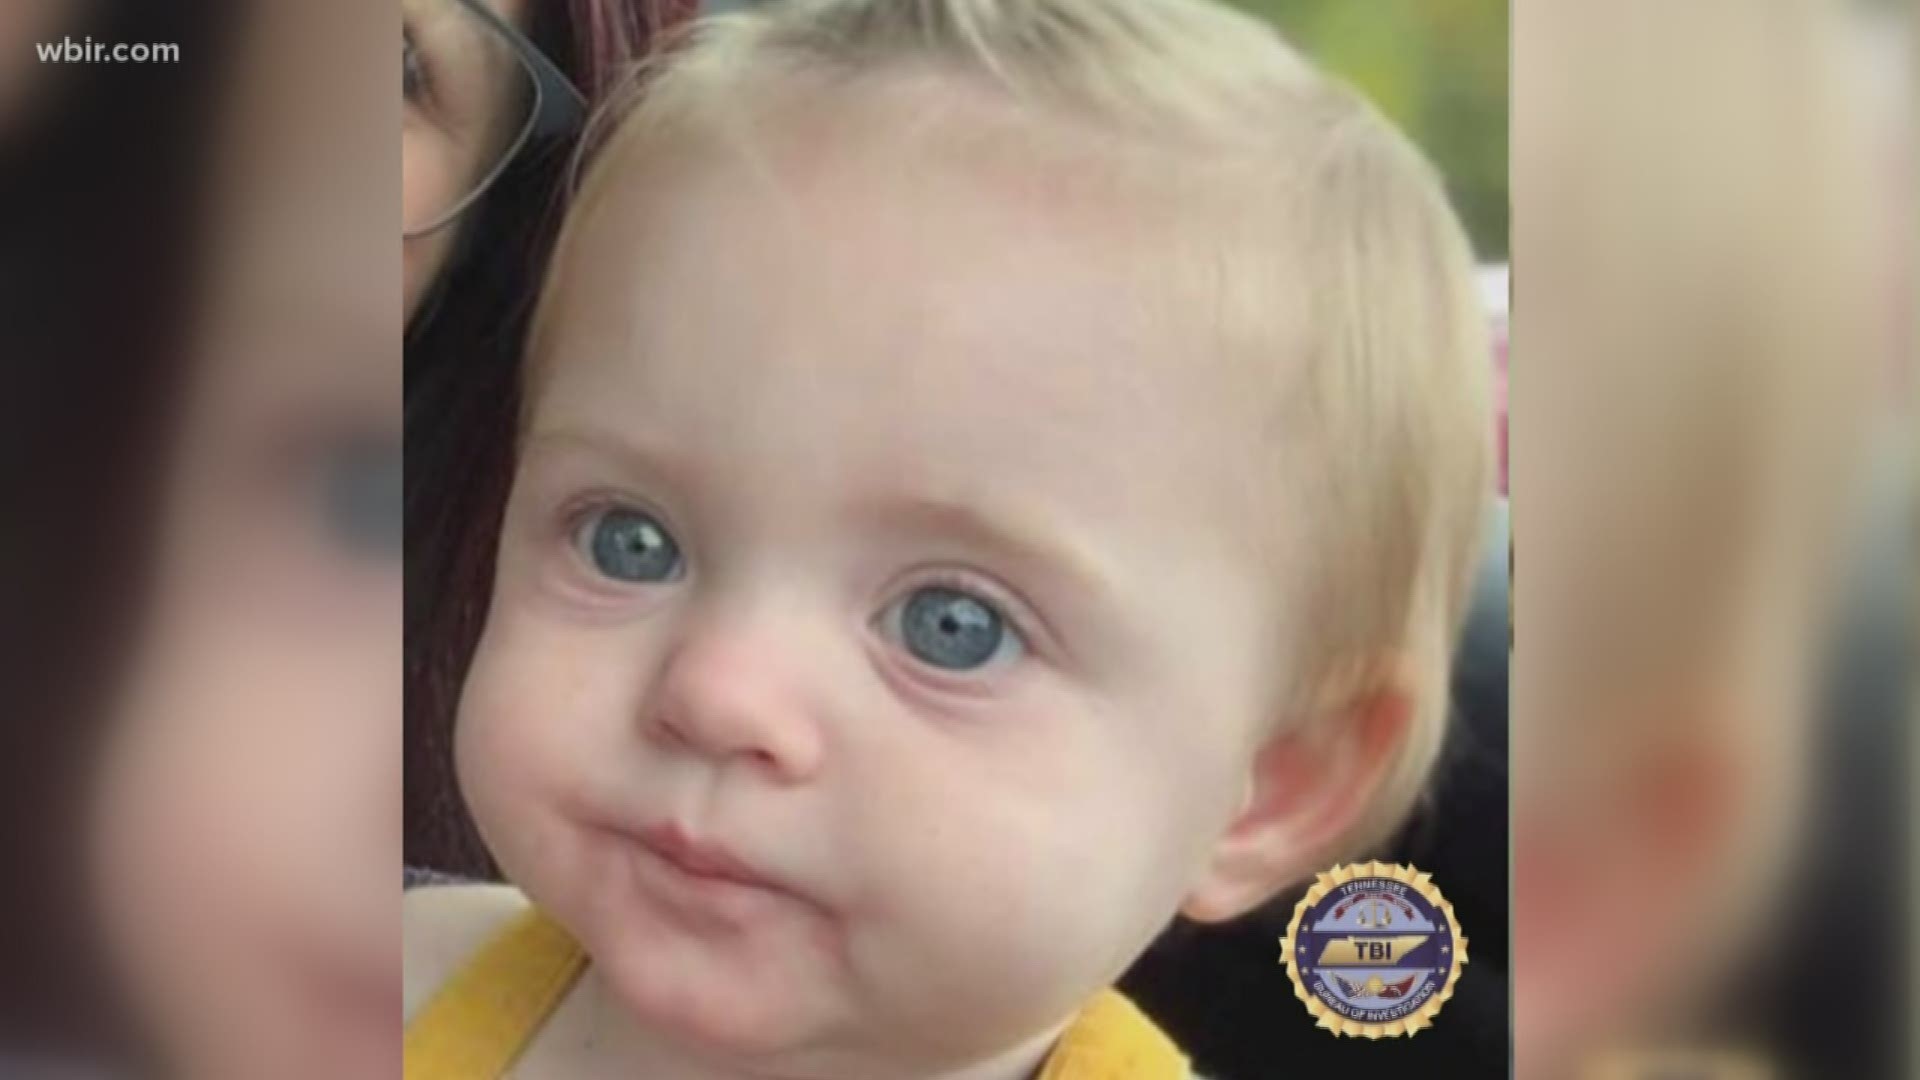 Agents said they are continuing to investigate leads as they come in, but at this time, the TBI said there have been no confirmed sightings of Evelyn.